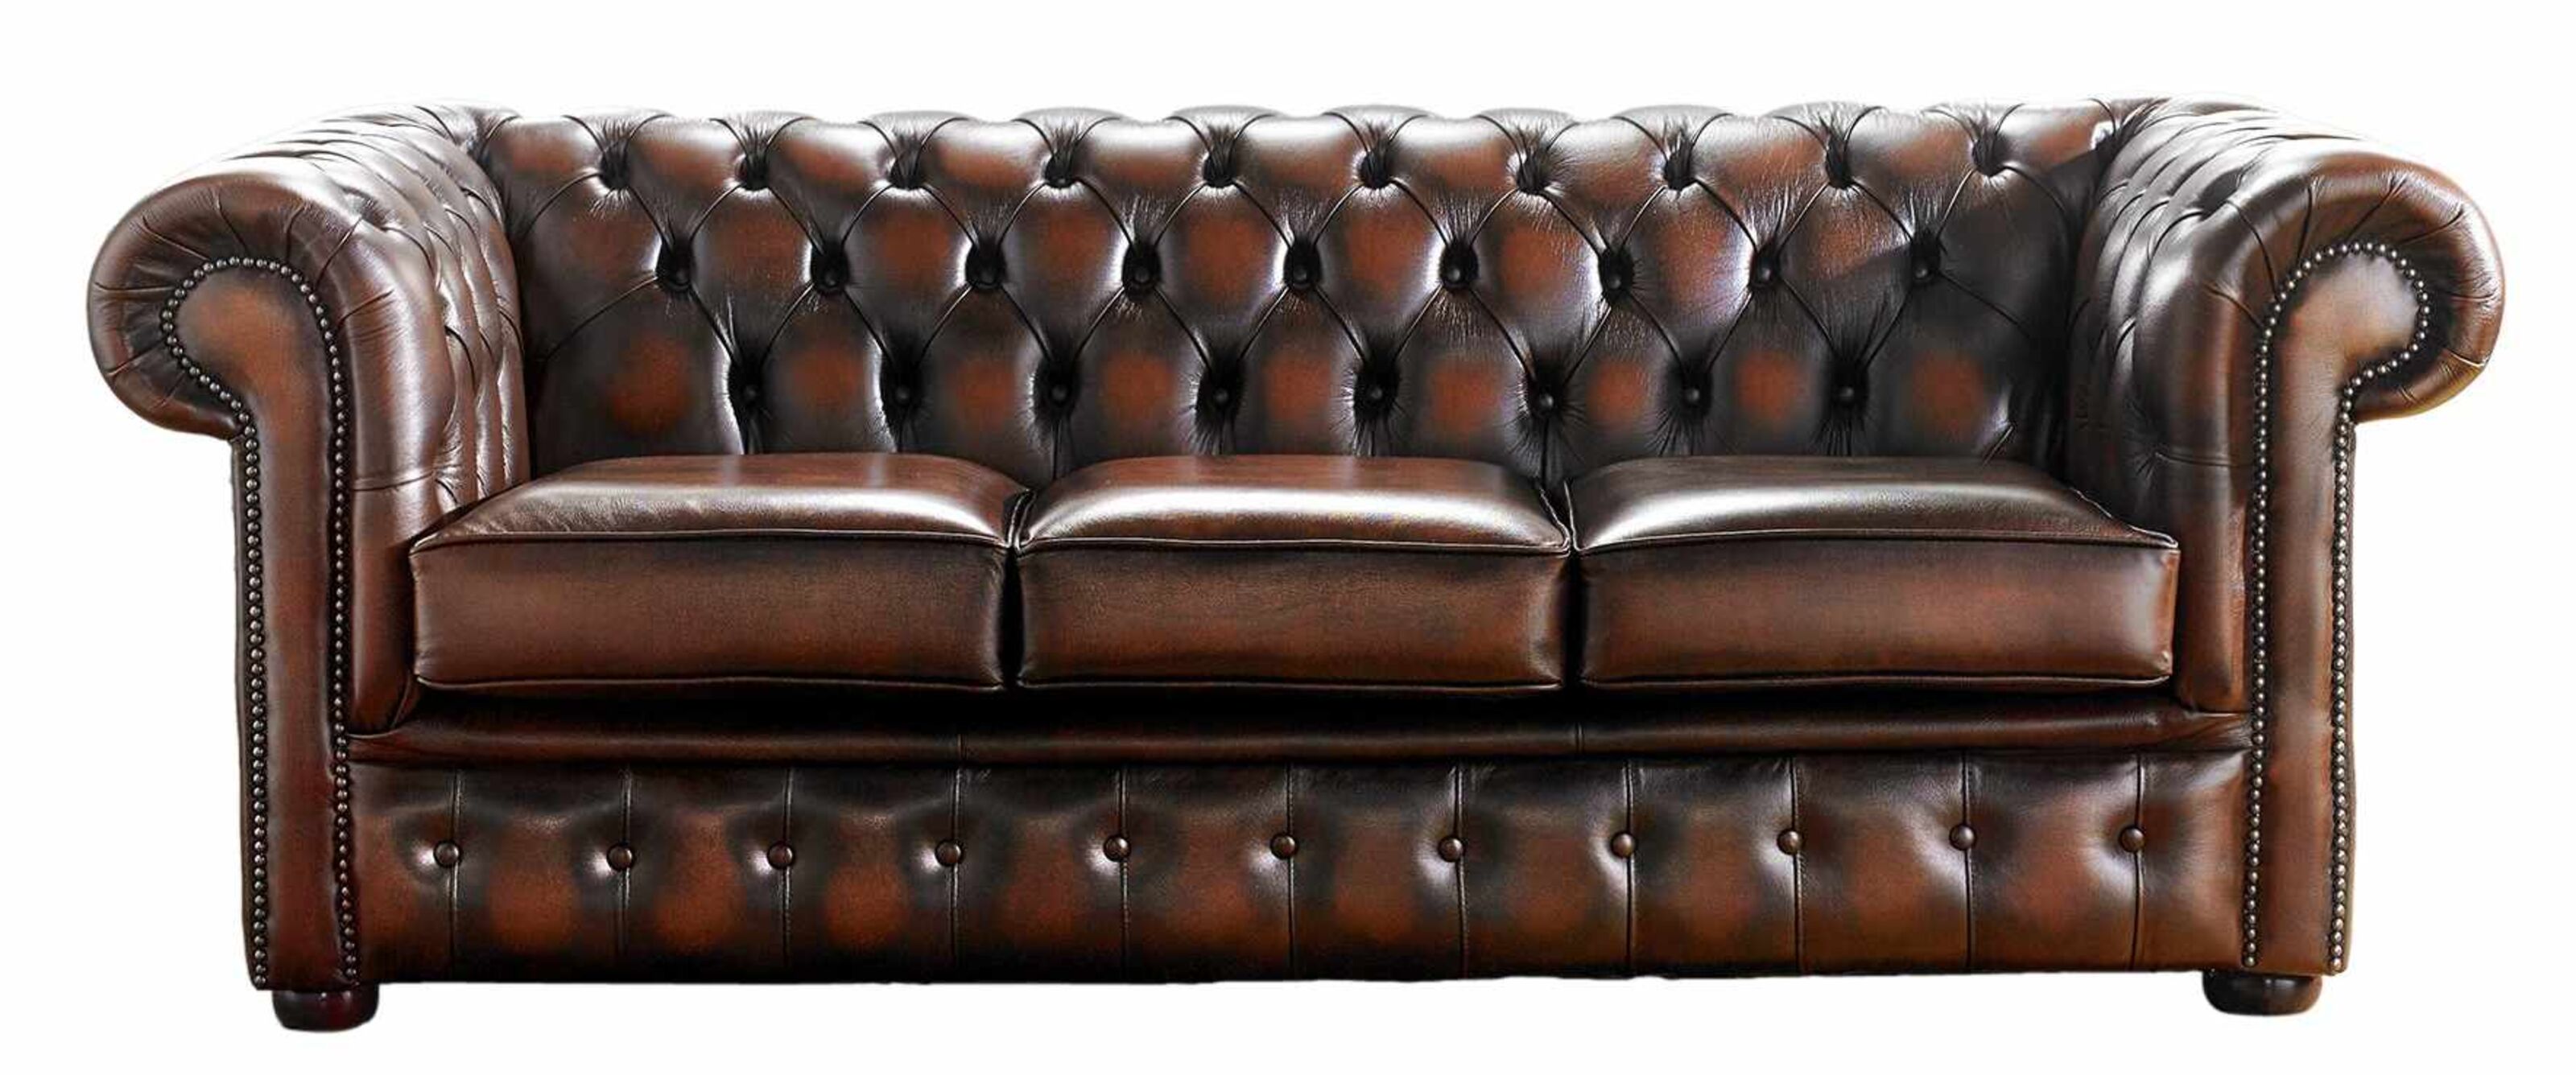 Deciphering Seating Unraveling the Distinctions Among Couches, Sofas, and Chesterfields  %Post Title